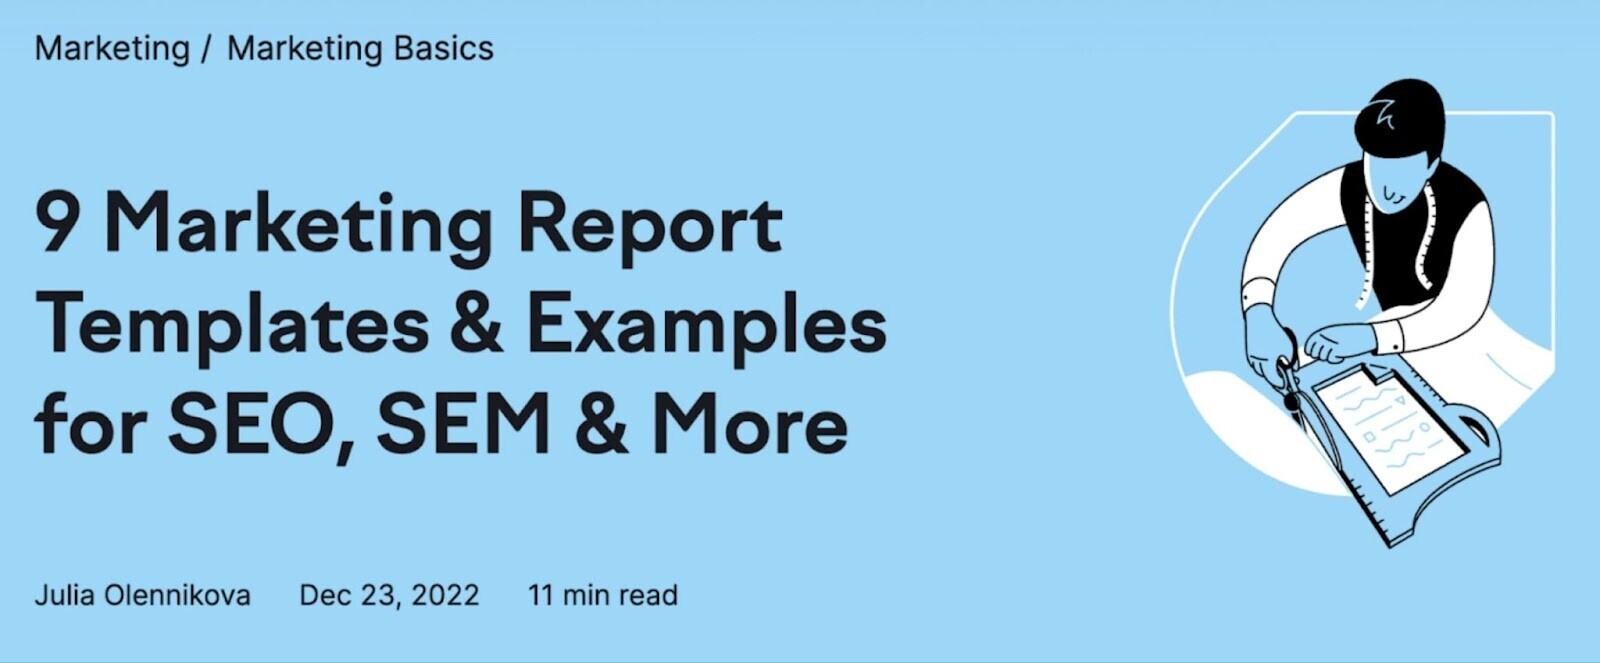 "9 Marketing Report Templates & Examples for SEO, SEM & More" title